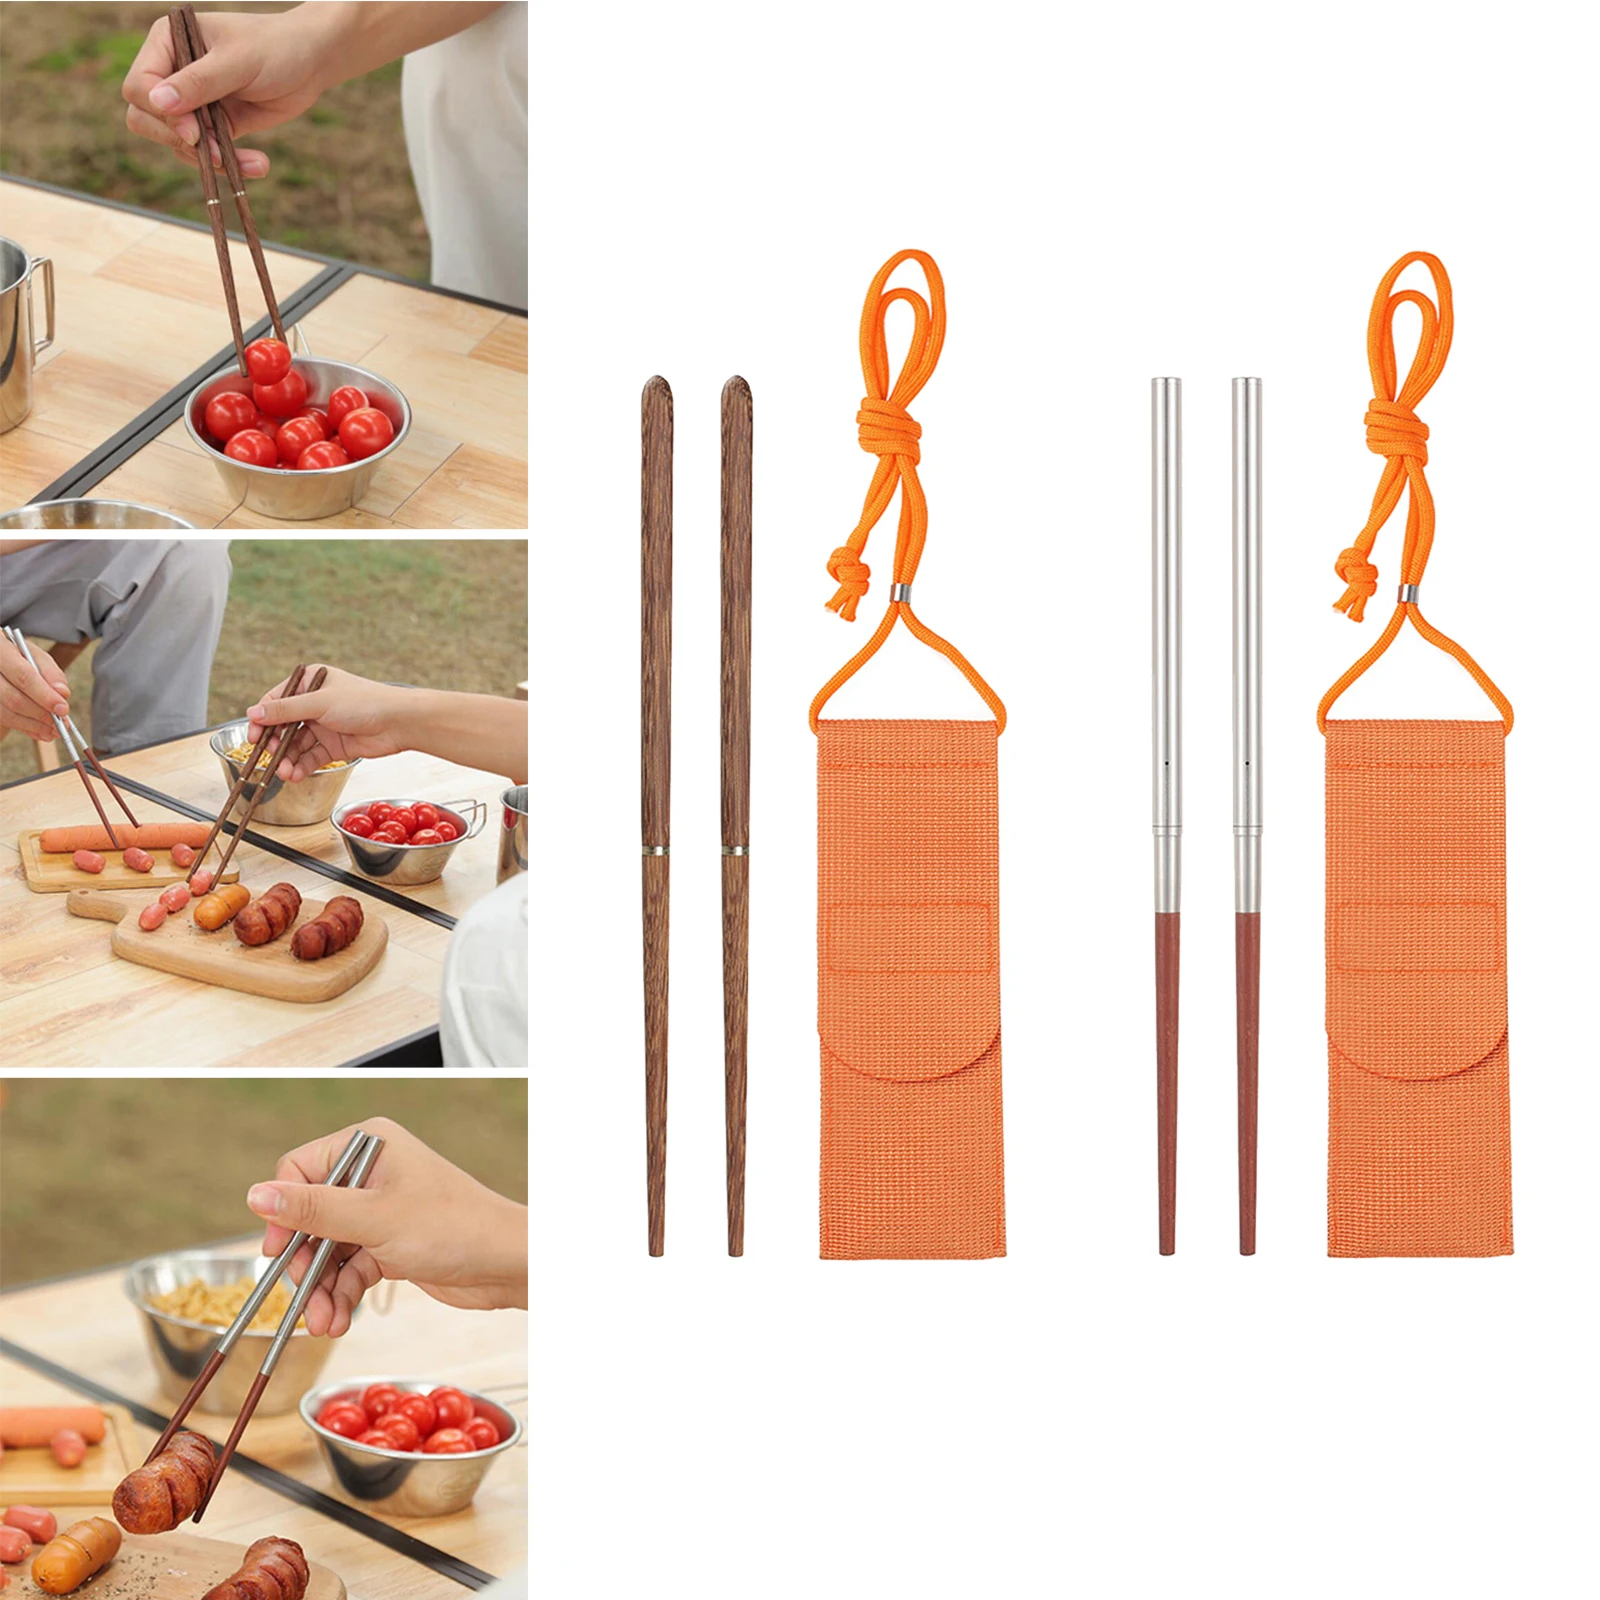 Lightweight Foldable Round Wooden Stainless Steel Chopsticks with Carrying Pouch for Camping Picnic Traveling